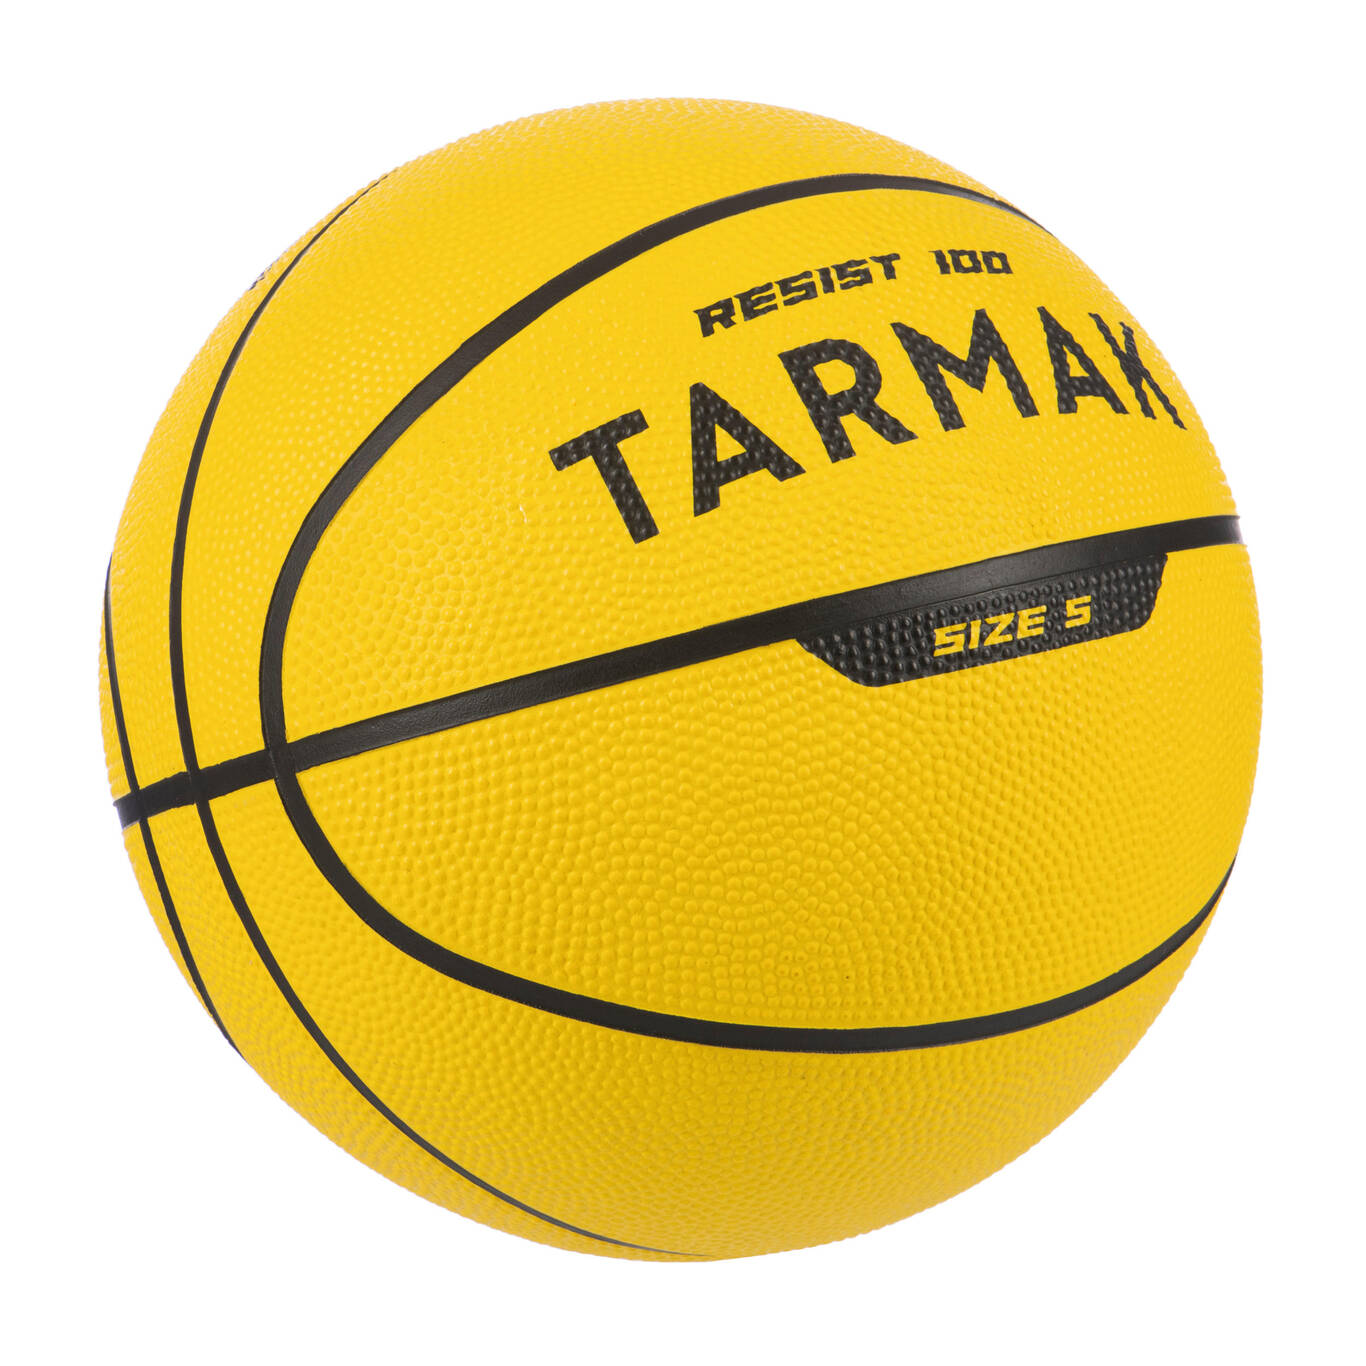 Beginners' Size 5 (Up to 10 Years Old) Basketball R100 - Yellow